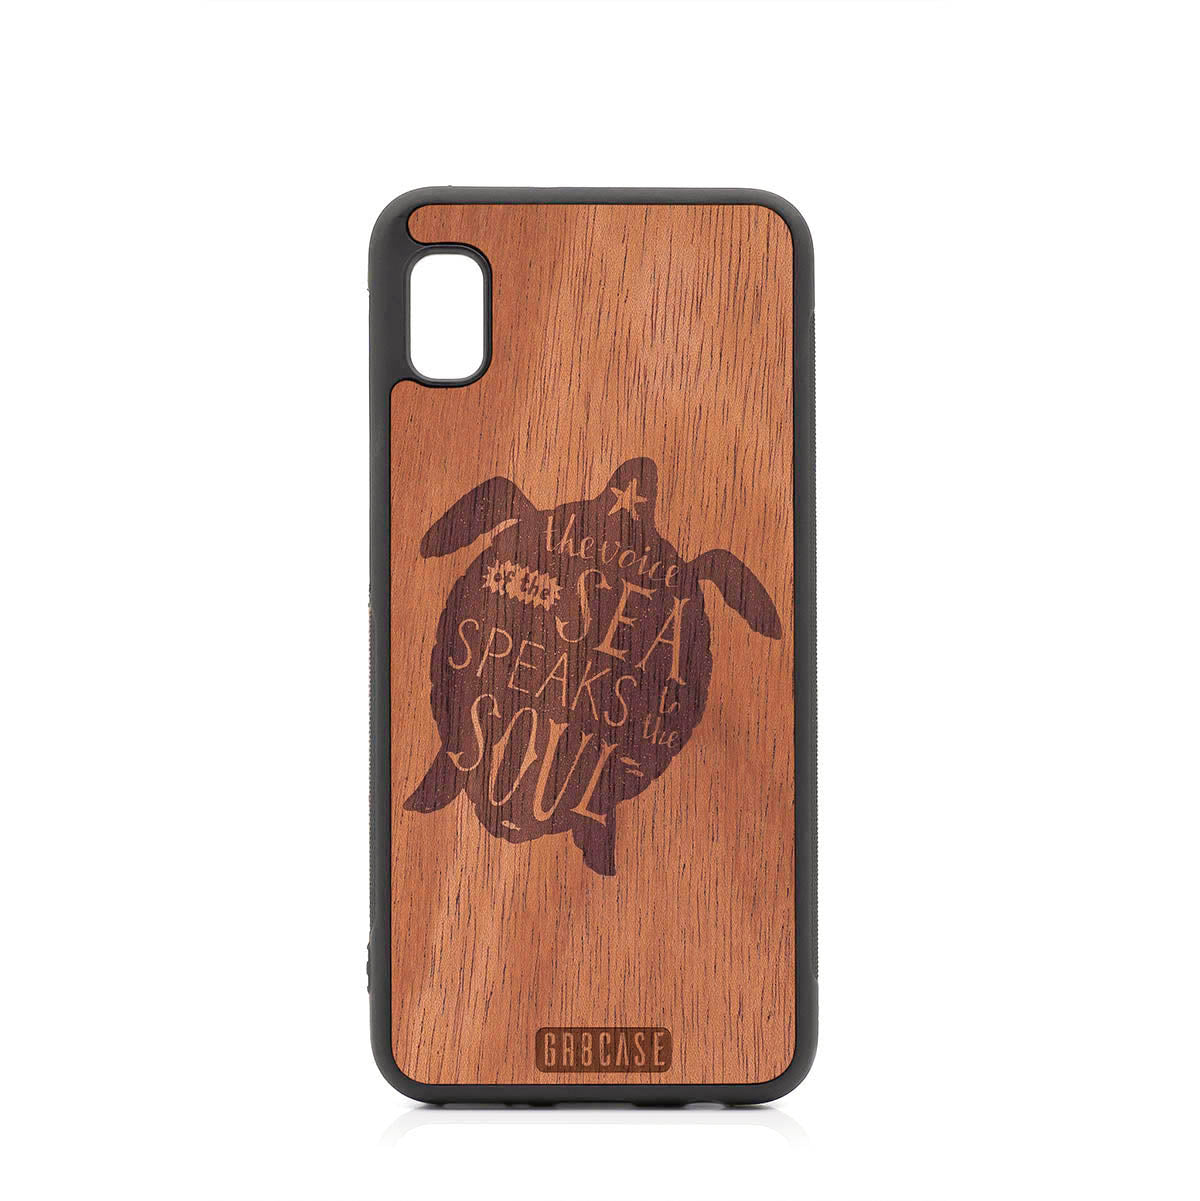 The Voice Of The Sea Speaks To The Soul (Turtle) Design Wood Case For Samsung Galaxy A10E